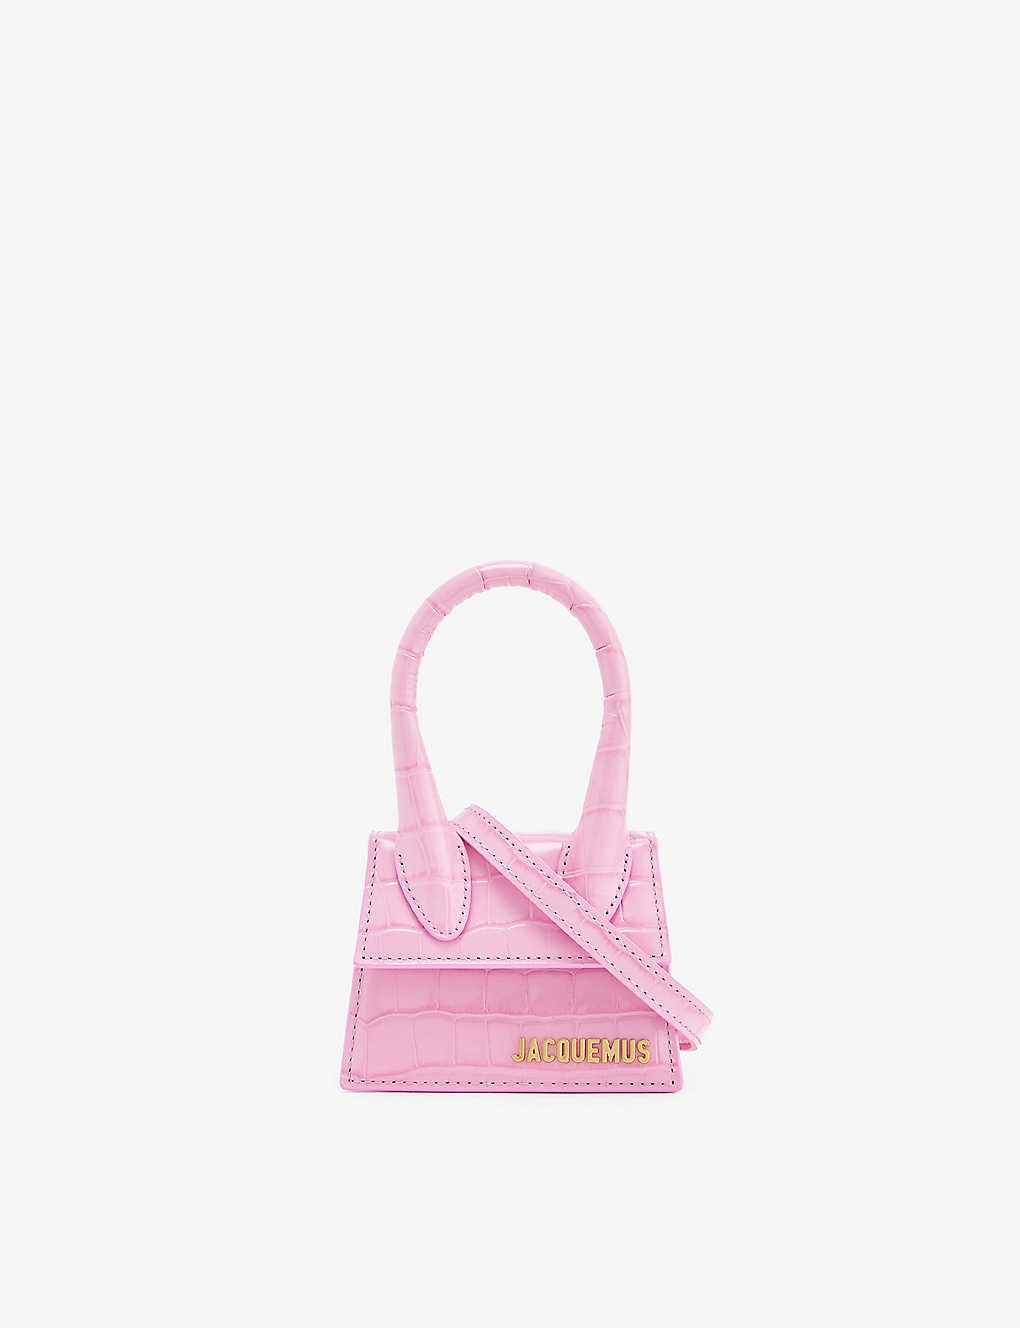 Jacquemus Pink Le Chiquito Leather Top-handle Bag